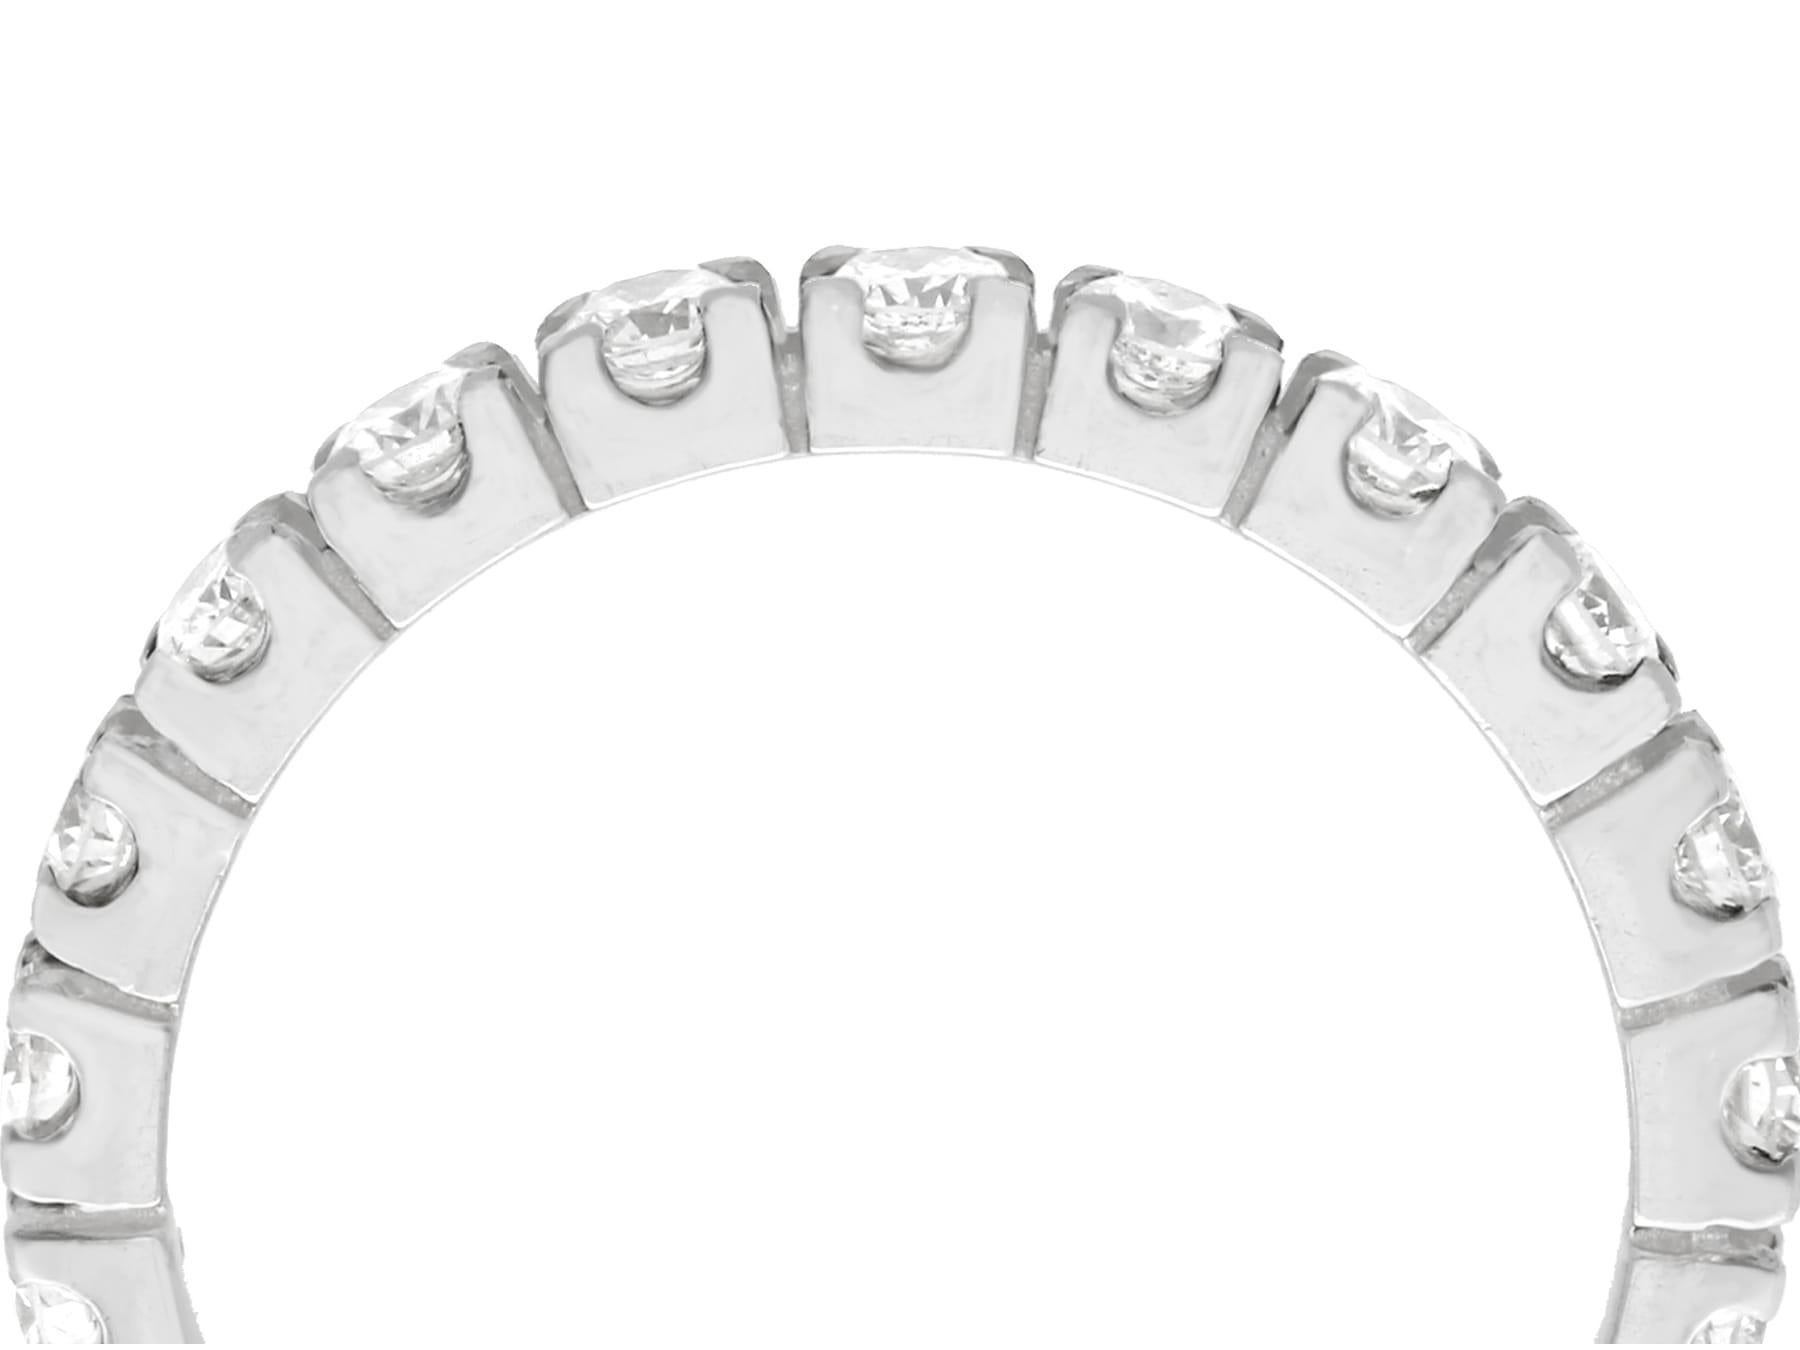 A stunning 1 carat diamond and 15 karat white gold full eternity ring; a part of our diverse collection of vintage jewelry estate jewelry.

This fine and impressive vintage eternity band ring has been crafted in 15k white gold.

This full white gold